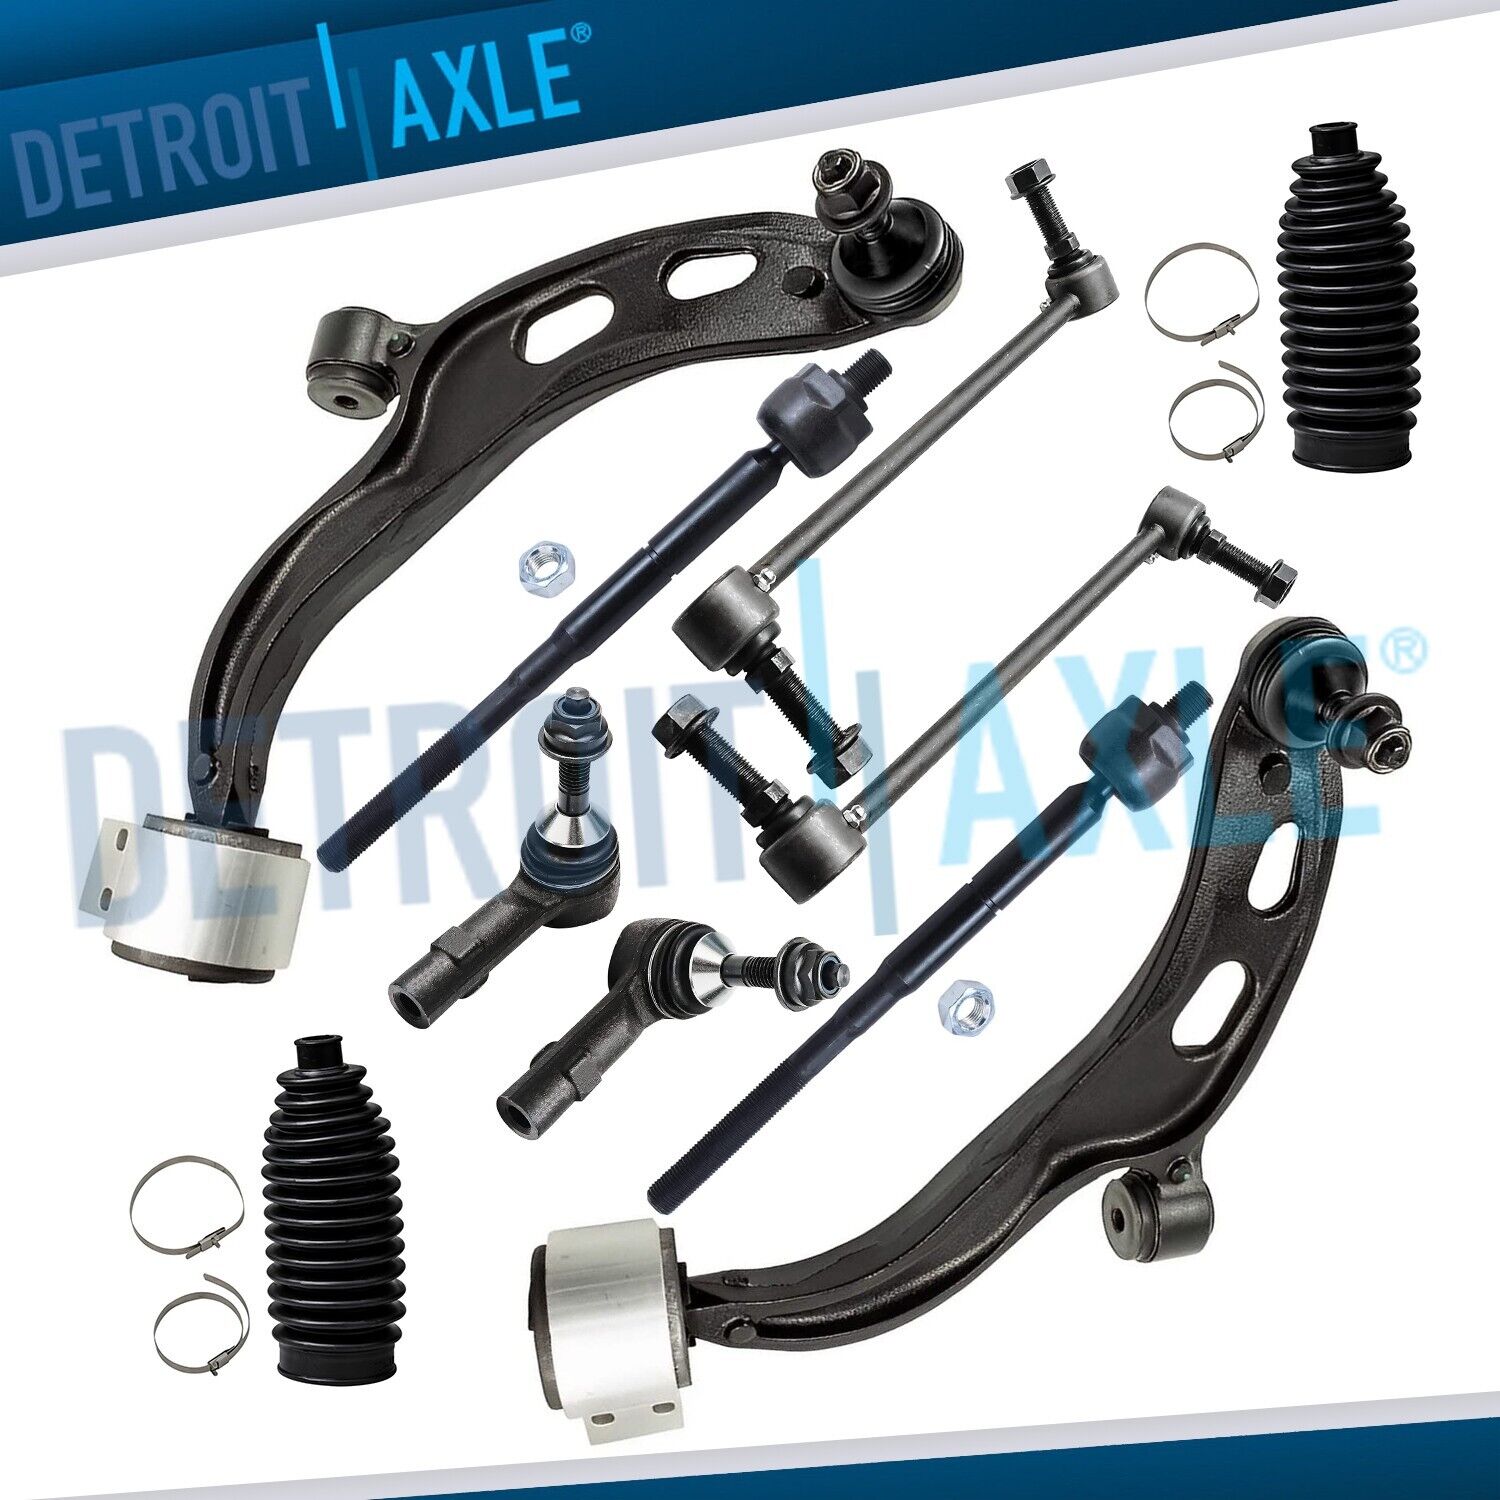 Front Lower Control Arms Sway Bars Tie Rods for Ford Taurus Flex Lincoln MKS MKT